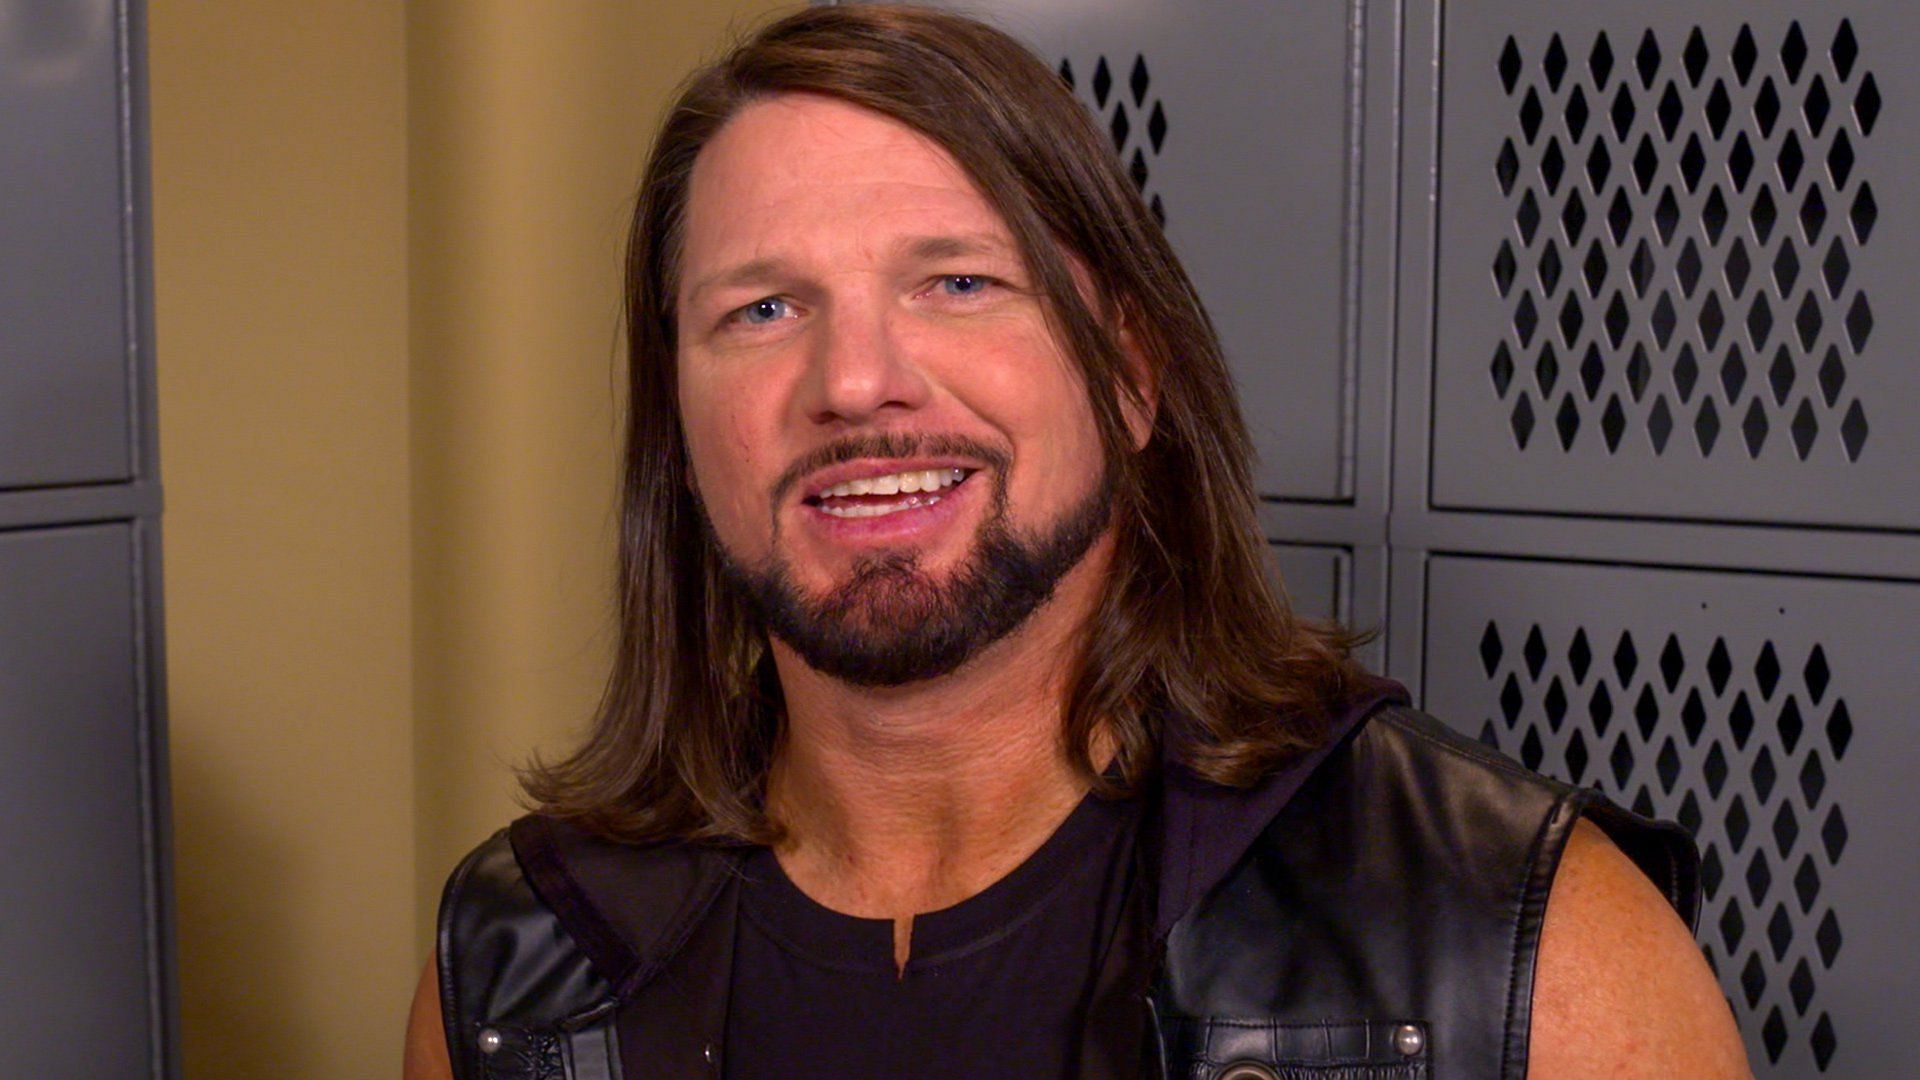 AJ Styles is one of the best wrestlers in the world